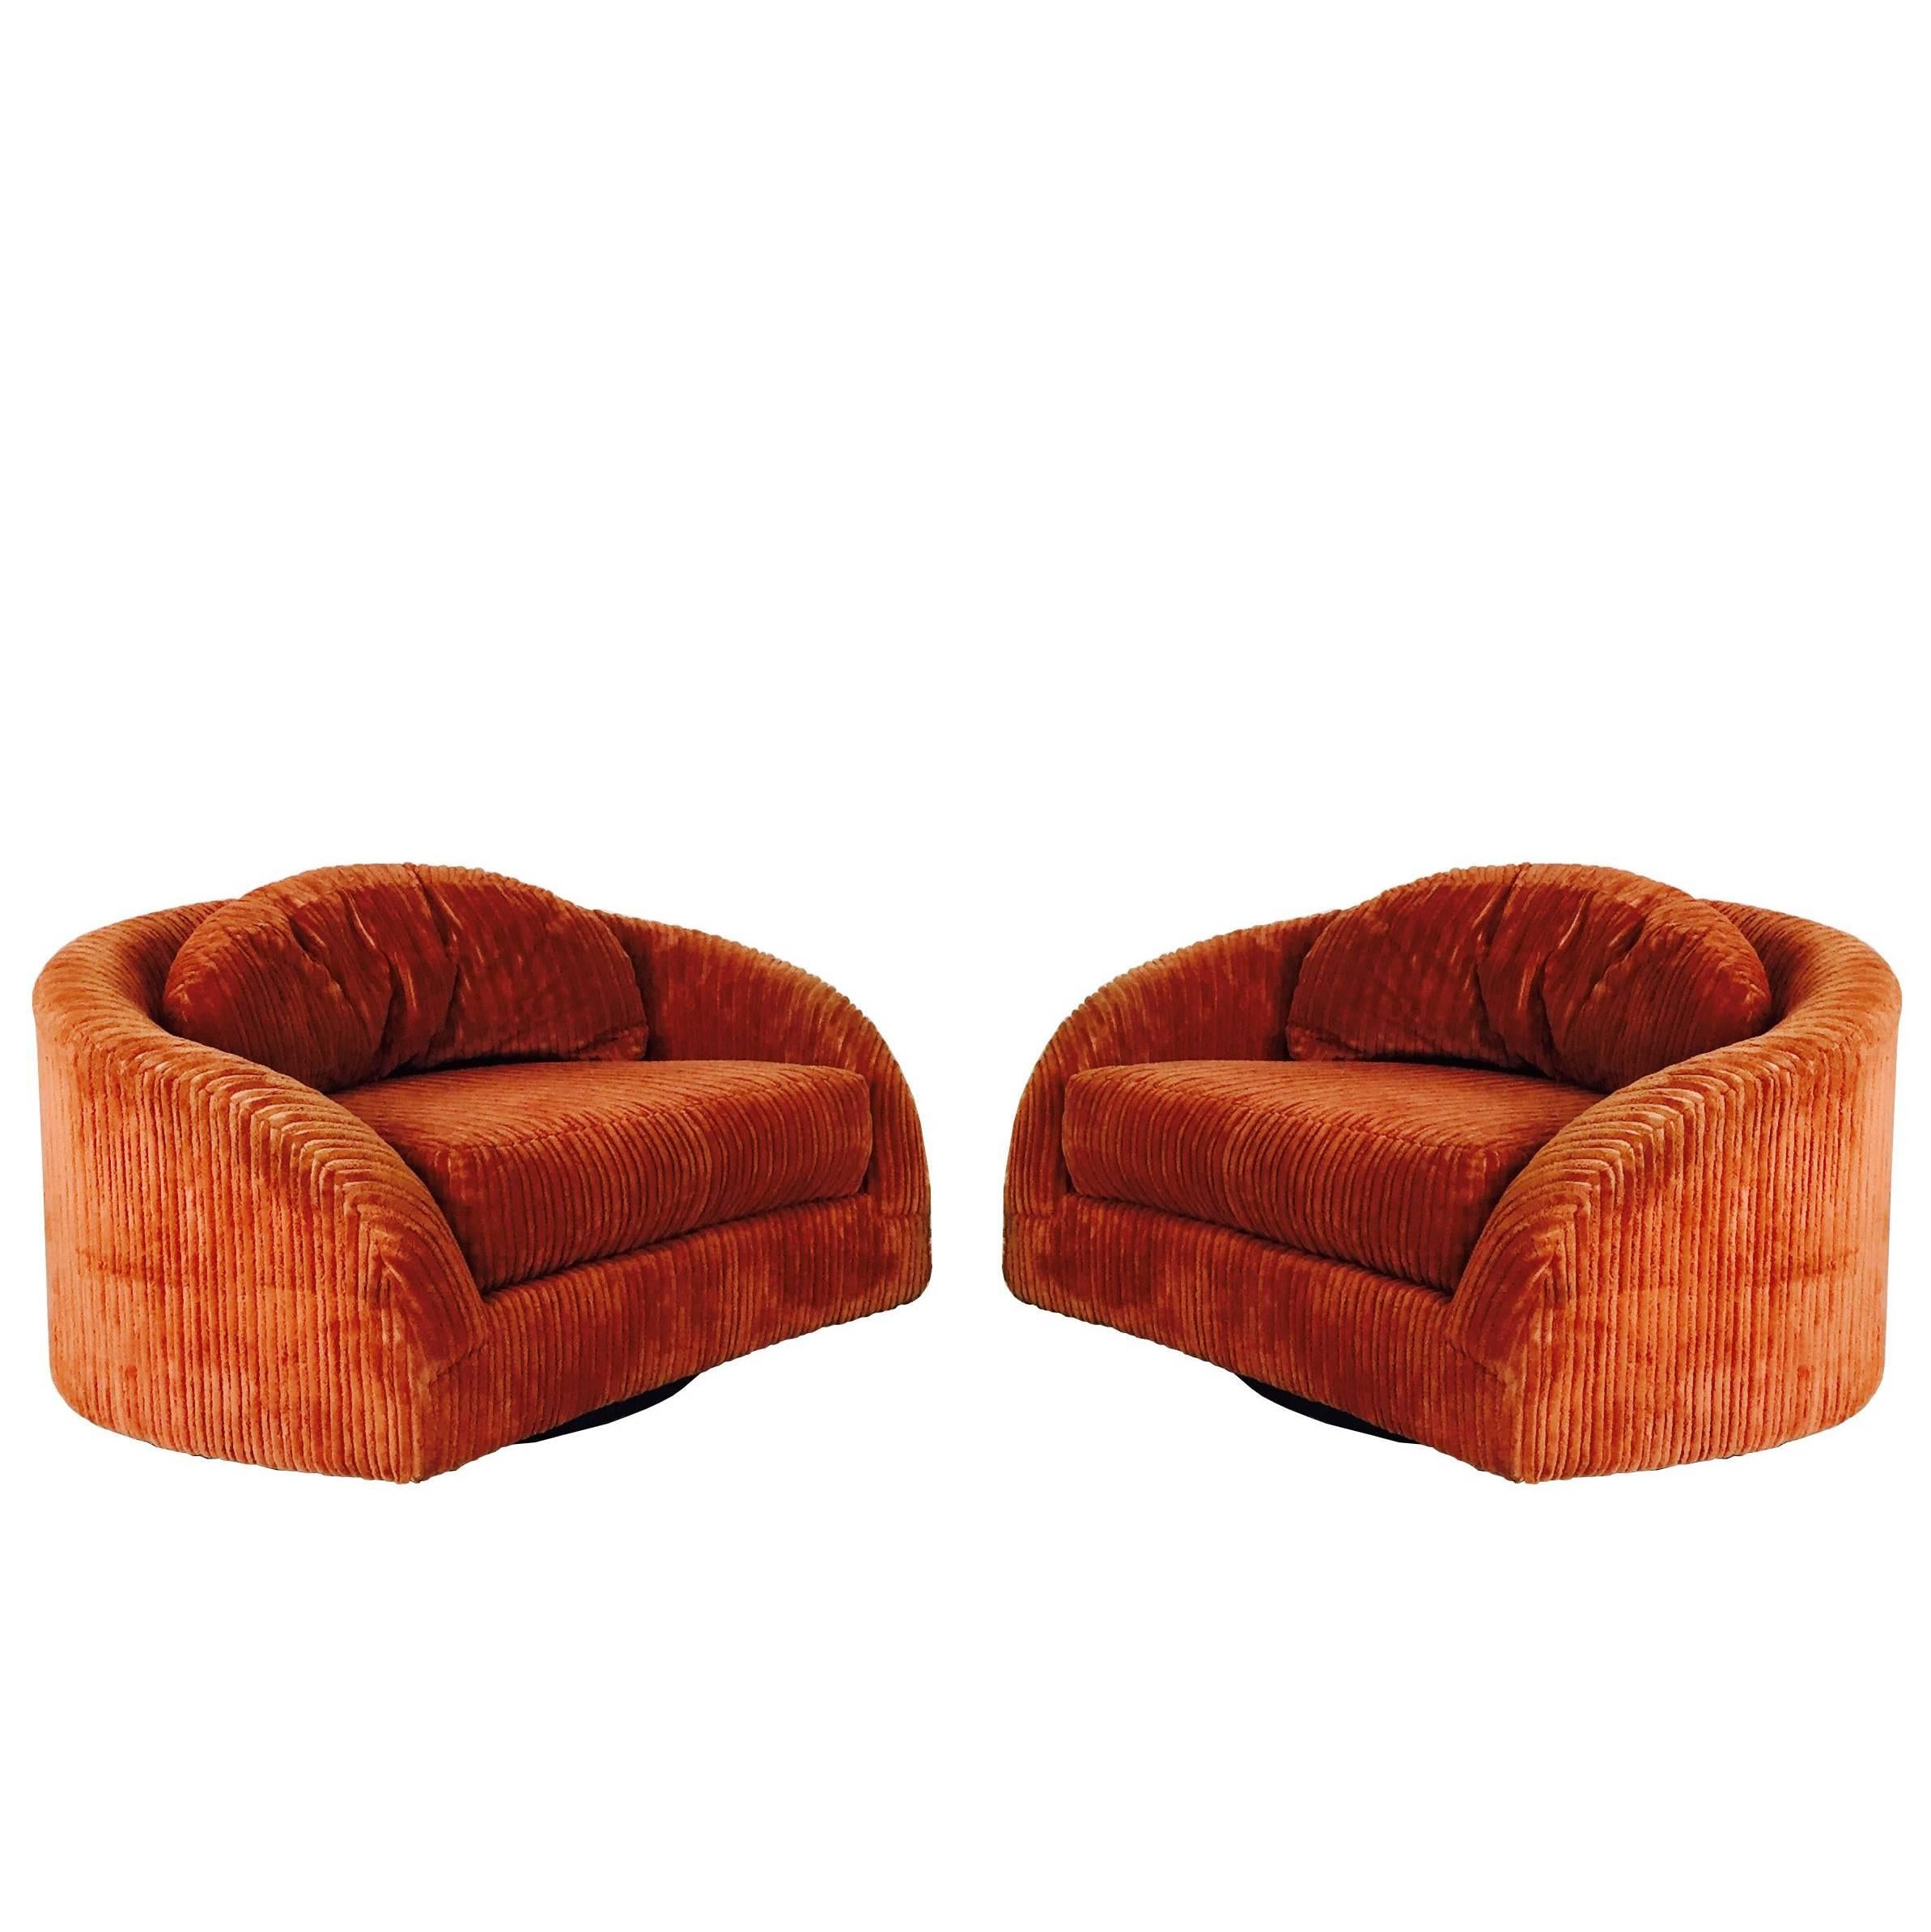 Pair of Monumental Swivel Chairs by Adrian Pearsall